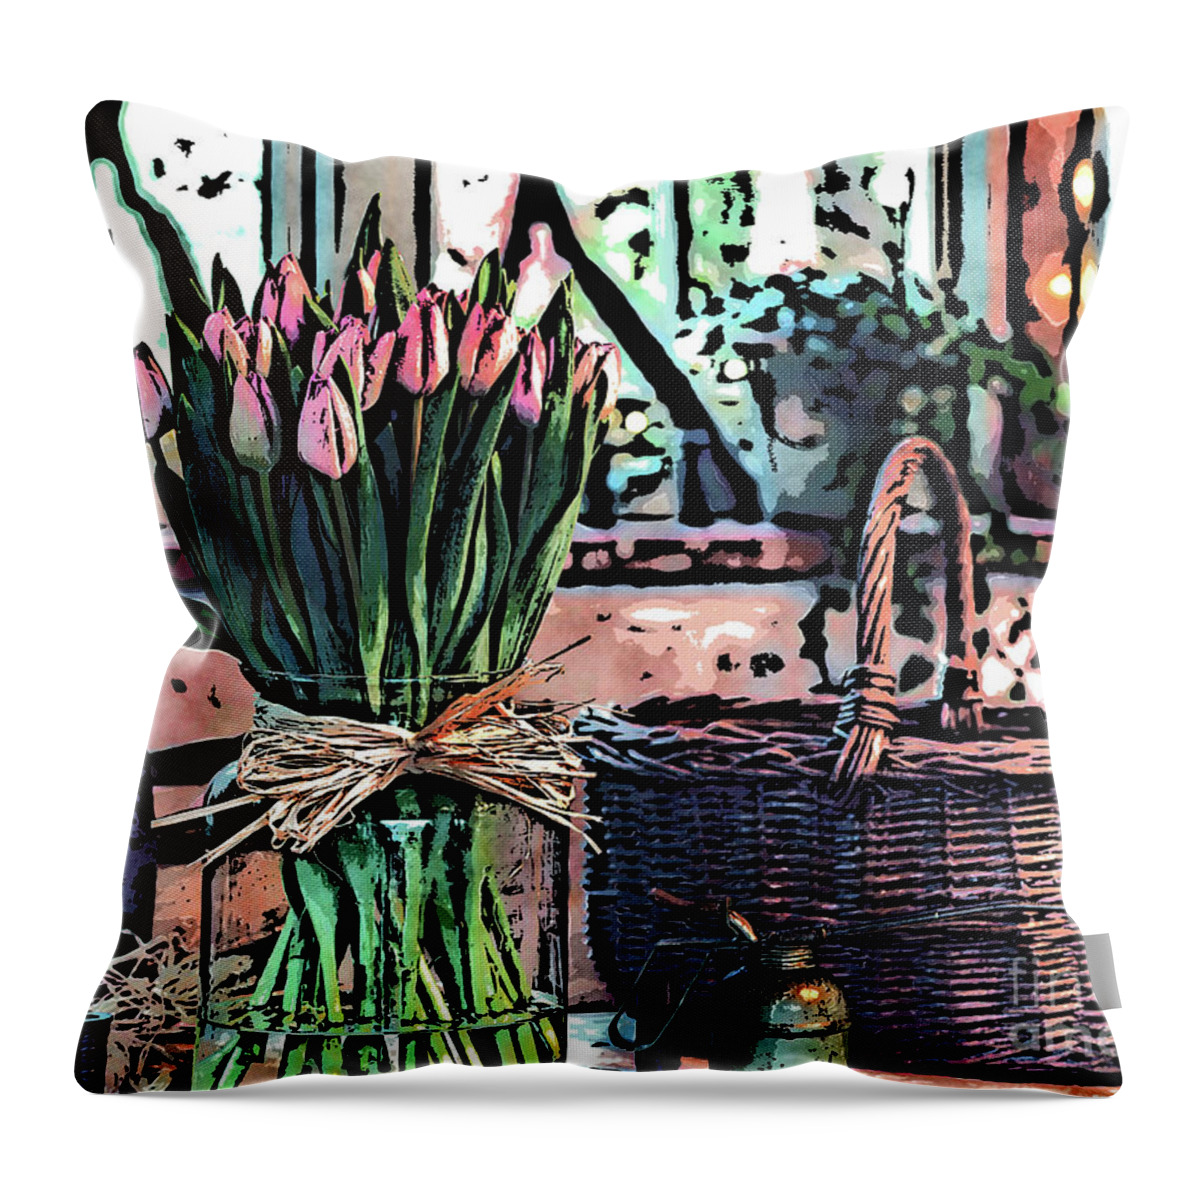 Wicker Basket Throw Pillow featuring the digital art Wicker Basket And Flowers by Phil Perkins